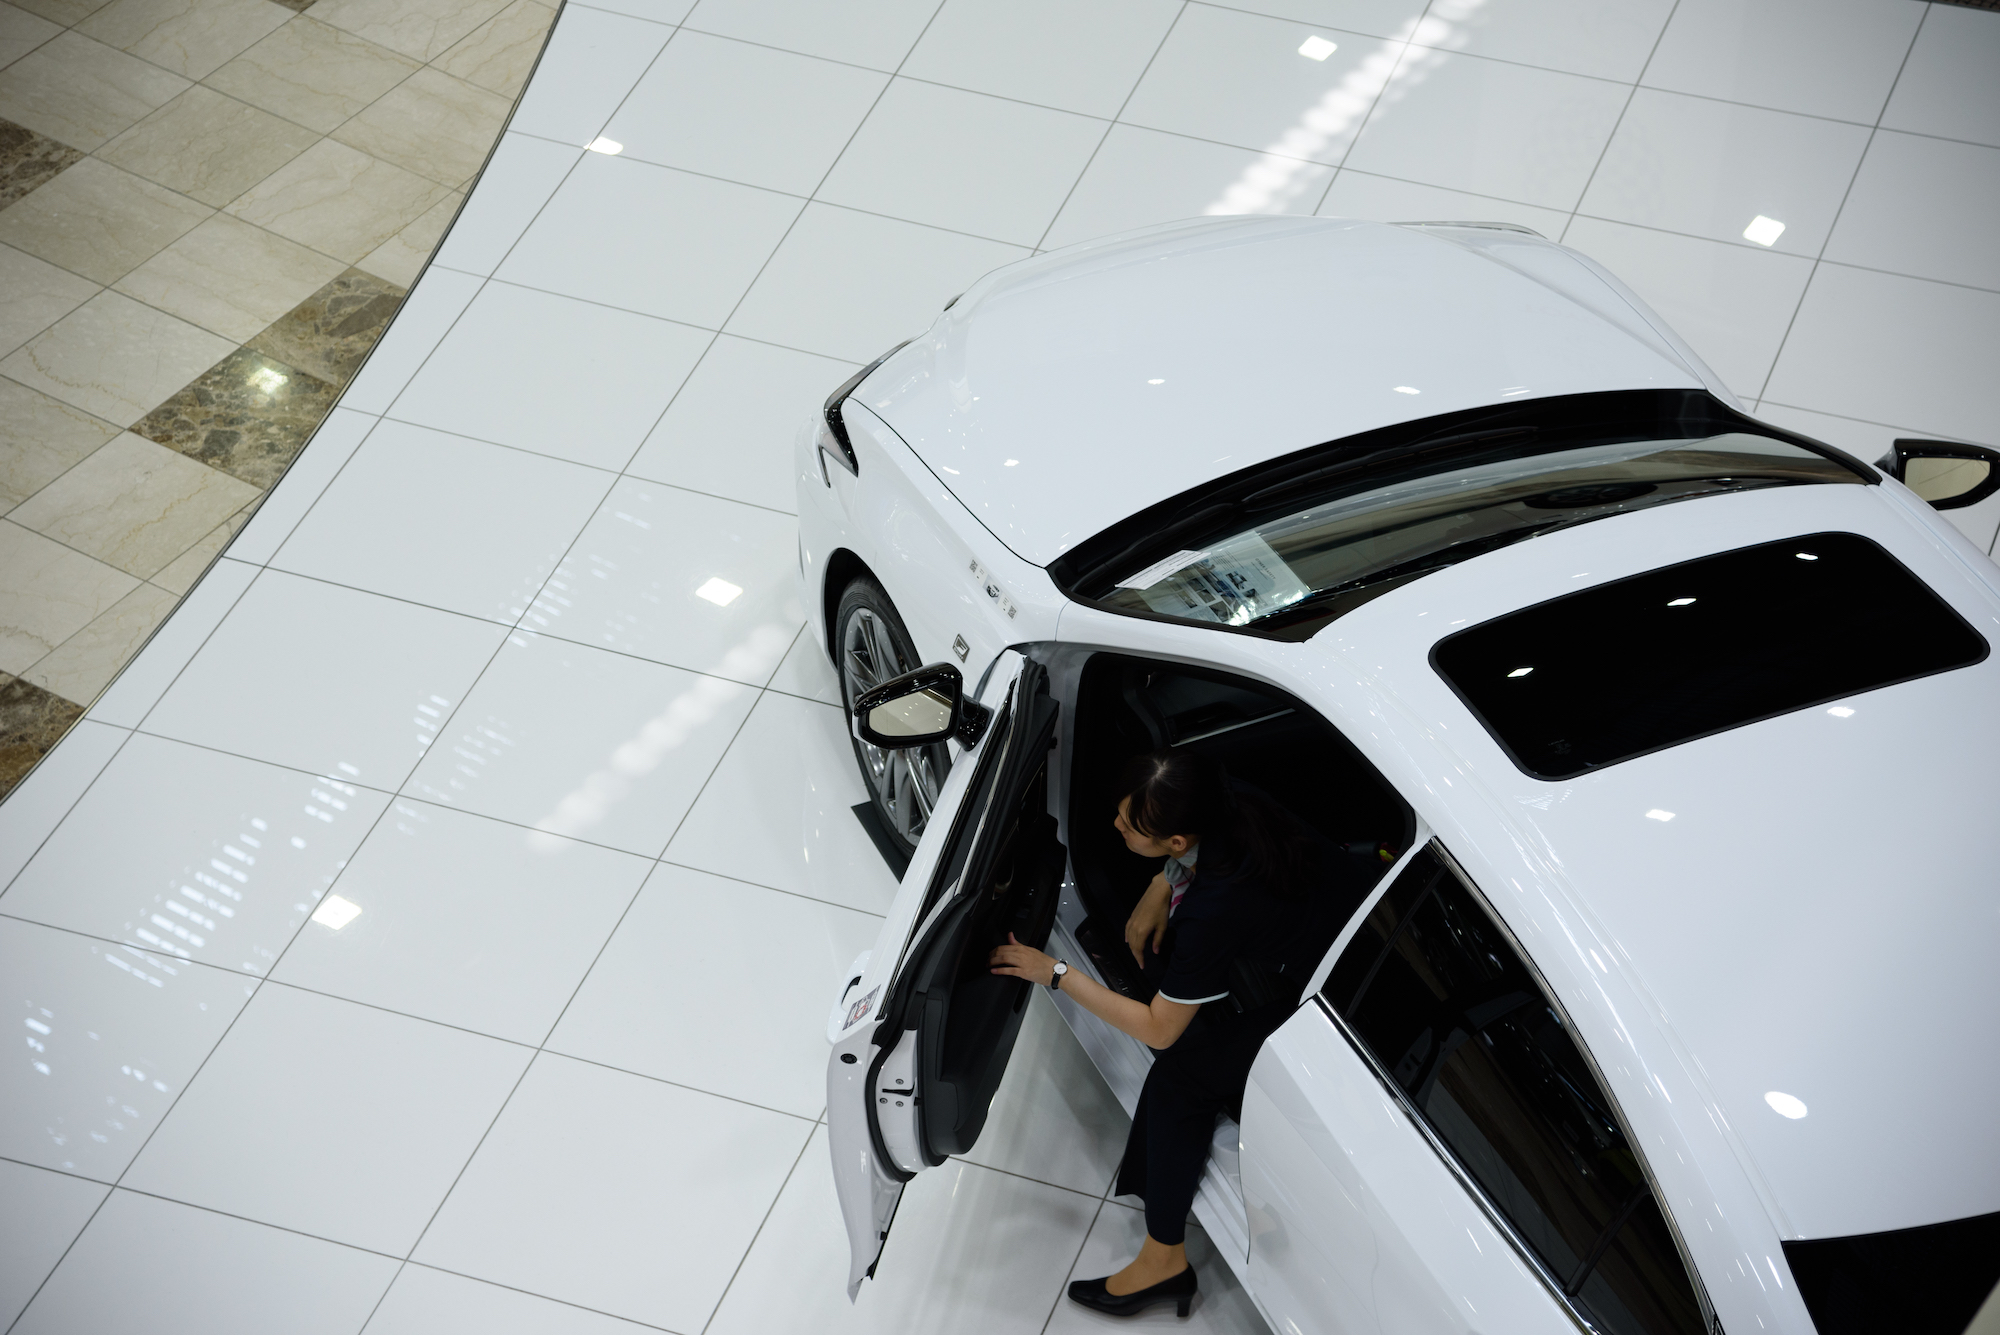 An employee comes out from a white 2019 Lexus ES 300h luxury car at the company's showroom in Toyota City, Aichi Prefecture, Japan, on Wednesday, June 12, 2019